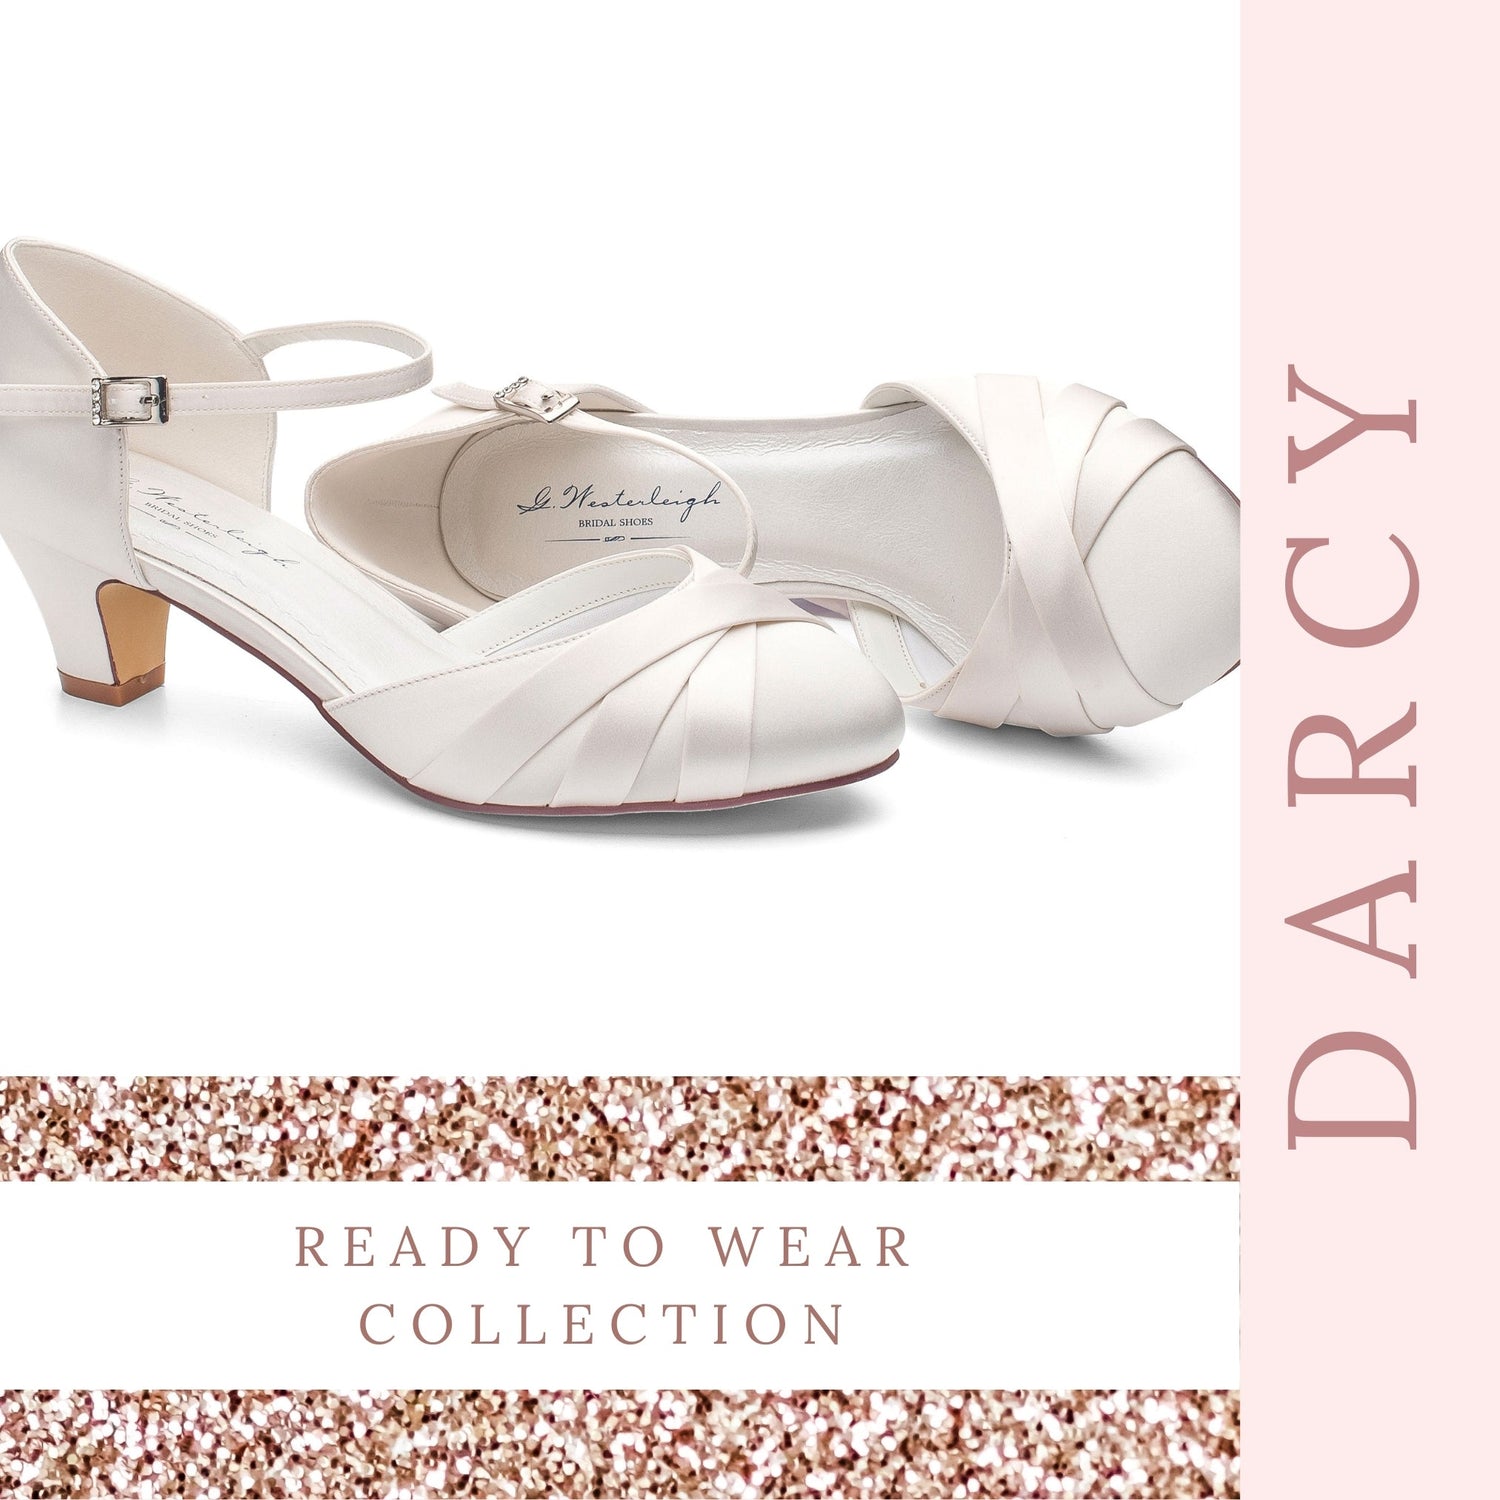 The 31 Best White Wedding Shoes for Brides